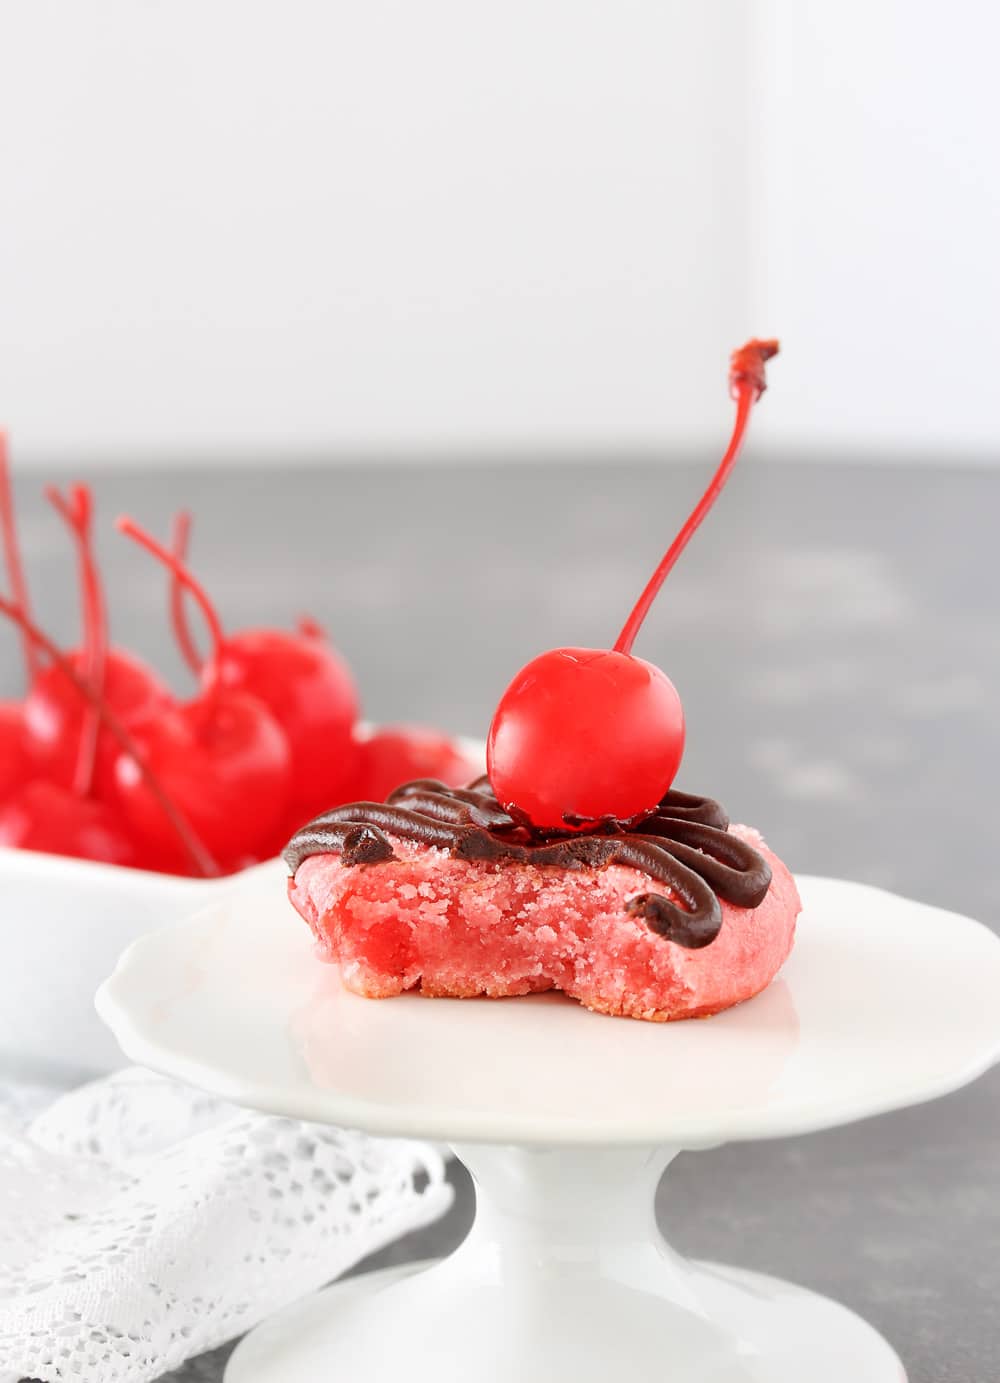 Glazed Chocolate Cherry Cookies | Soft and buttery cherry cookies, made with cherry juice and cherry pieces, are topped with a drizzle of melted chocolate, sweet glaze, and a cherry! | http://thechunkychef.com